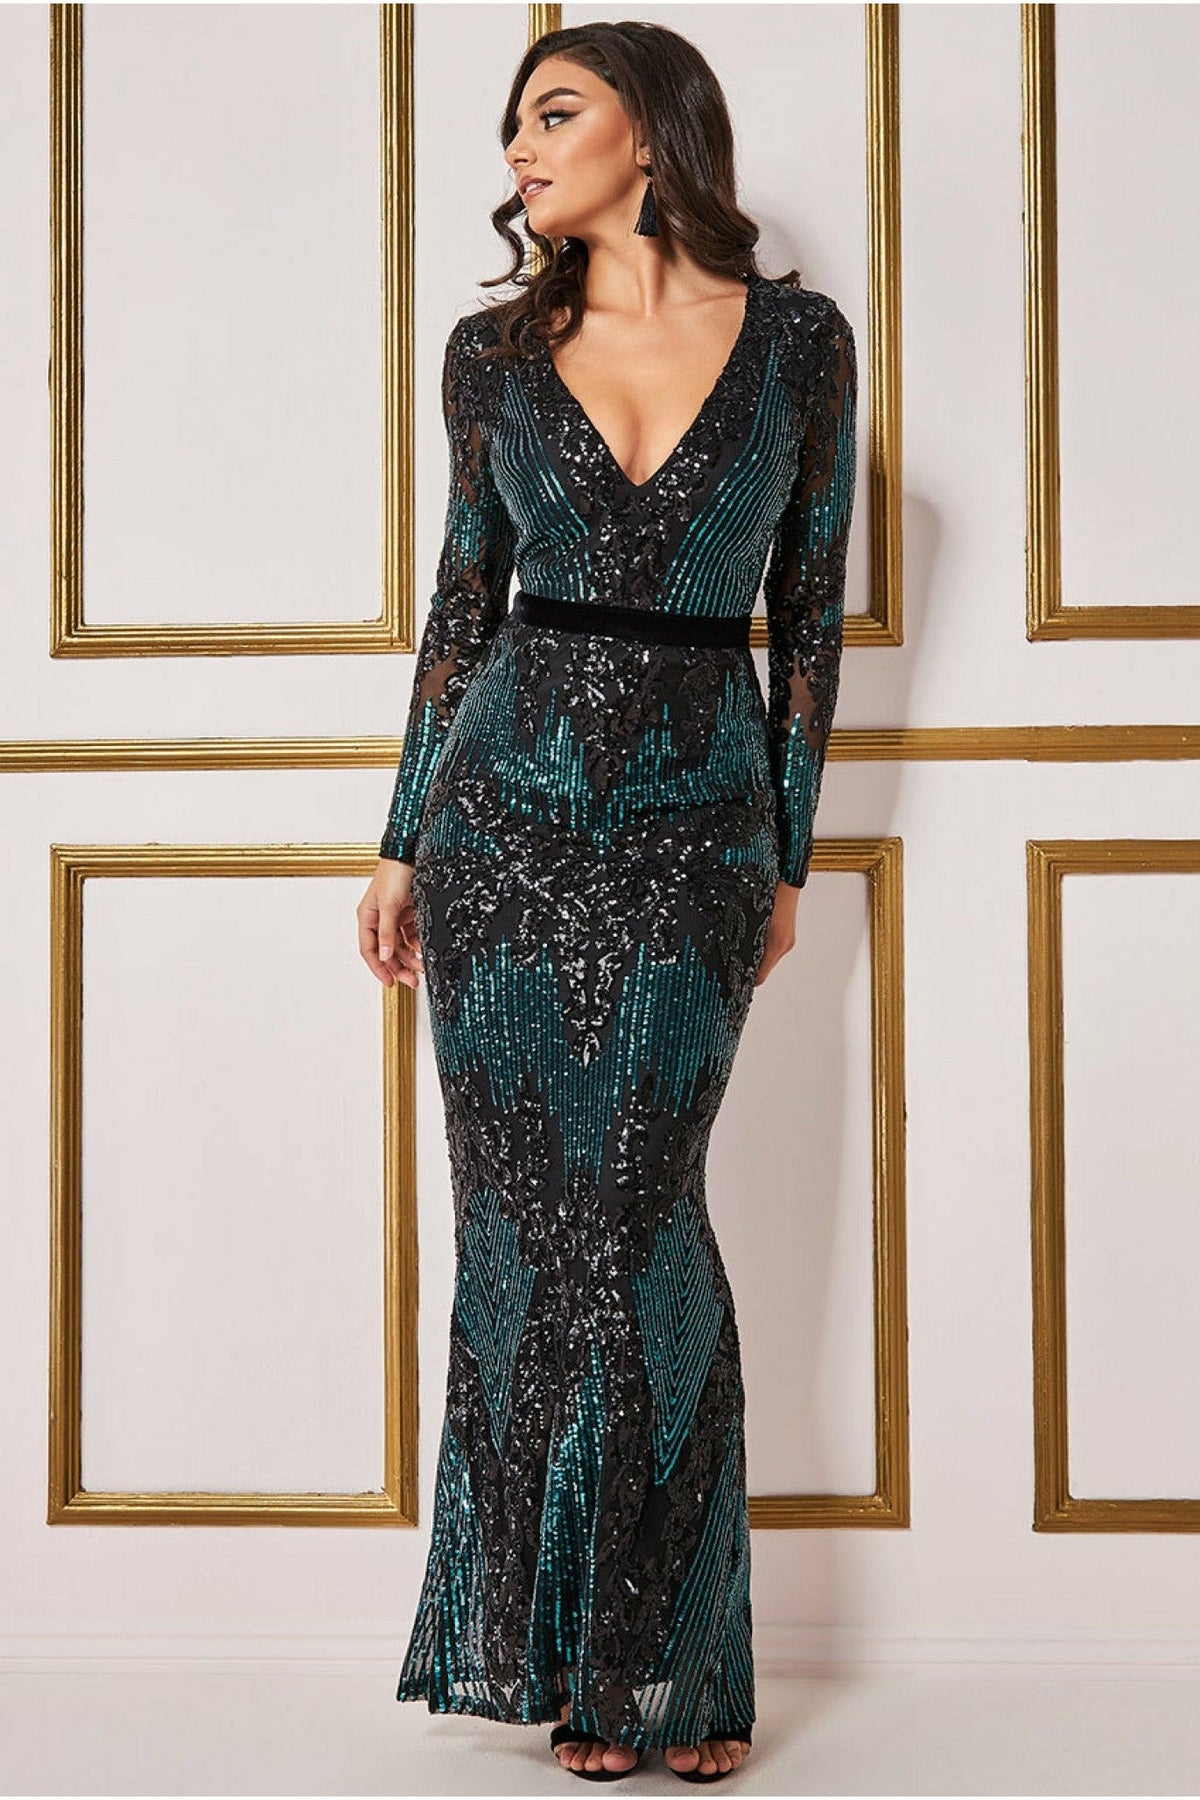 Evening Dresses | Cut Out Sleeve Silver Sequin Evening Gown – TGC FASHION